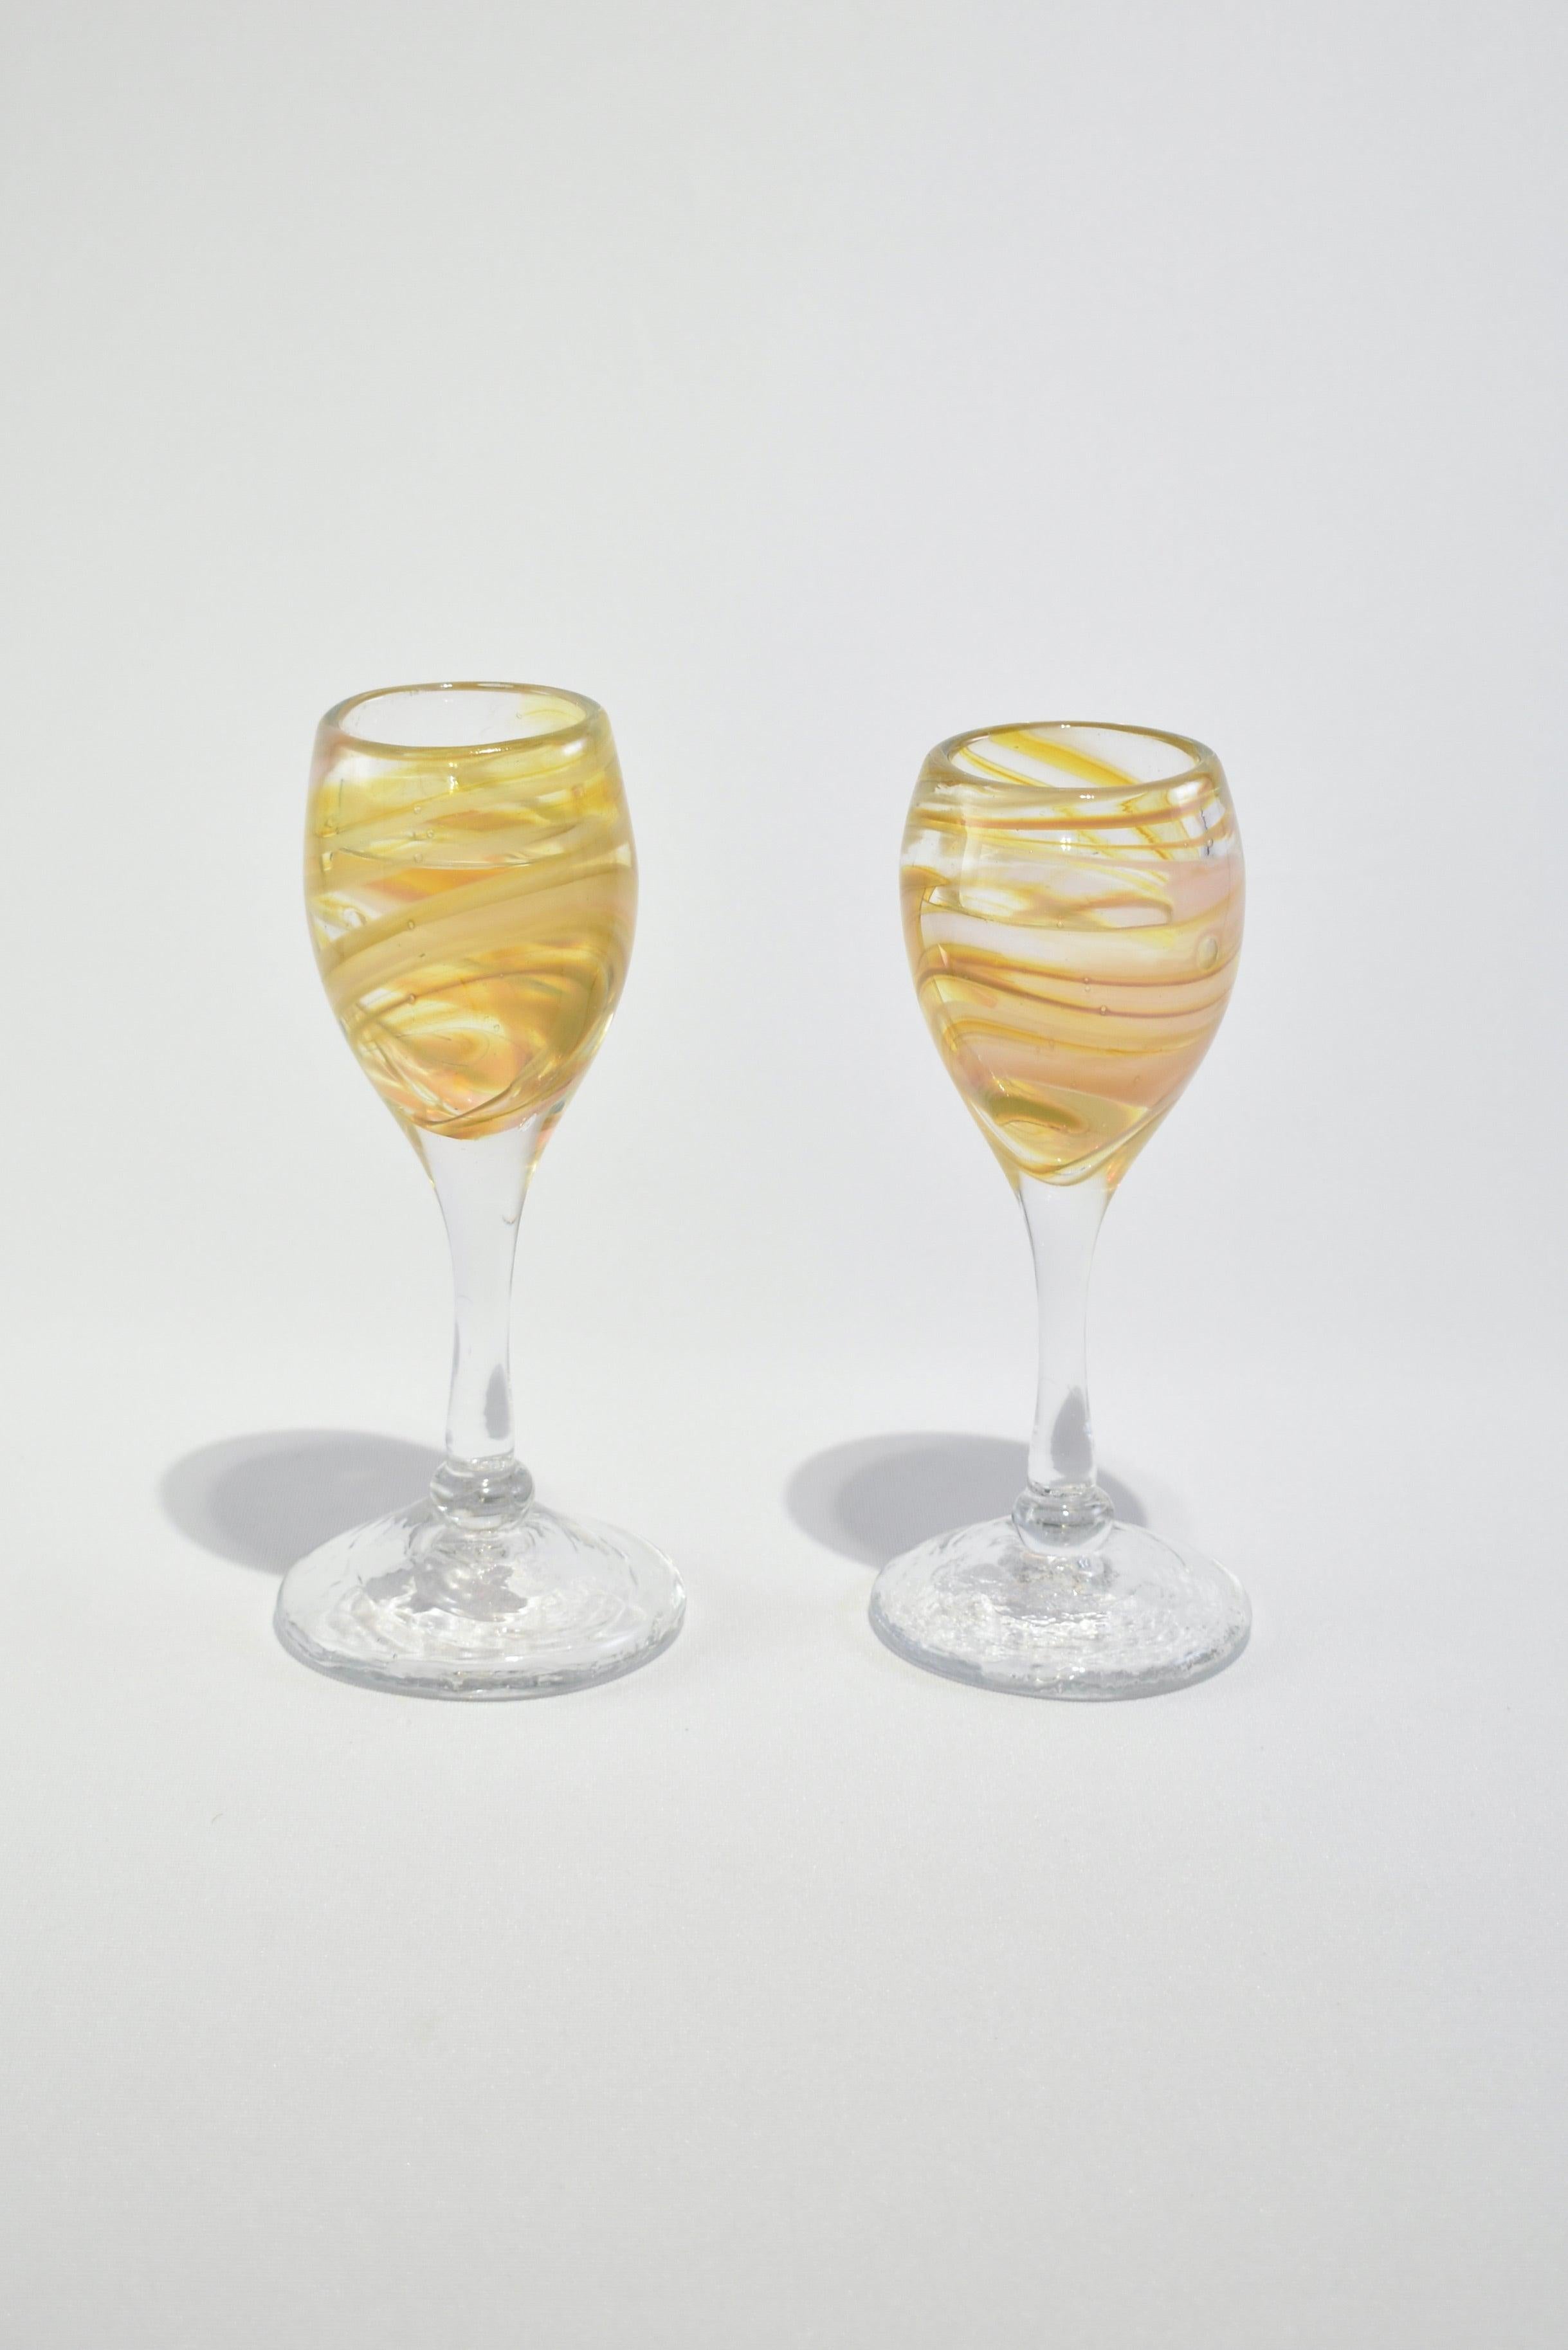 Stunning vintage blown glass goblets with a yellow and peach abstract design, set of two.